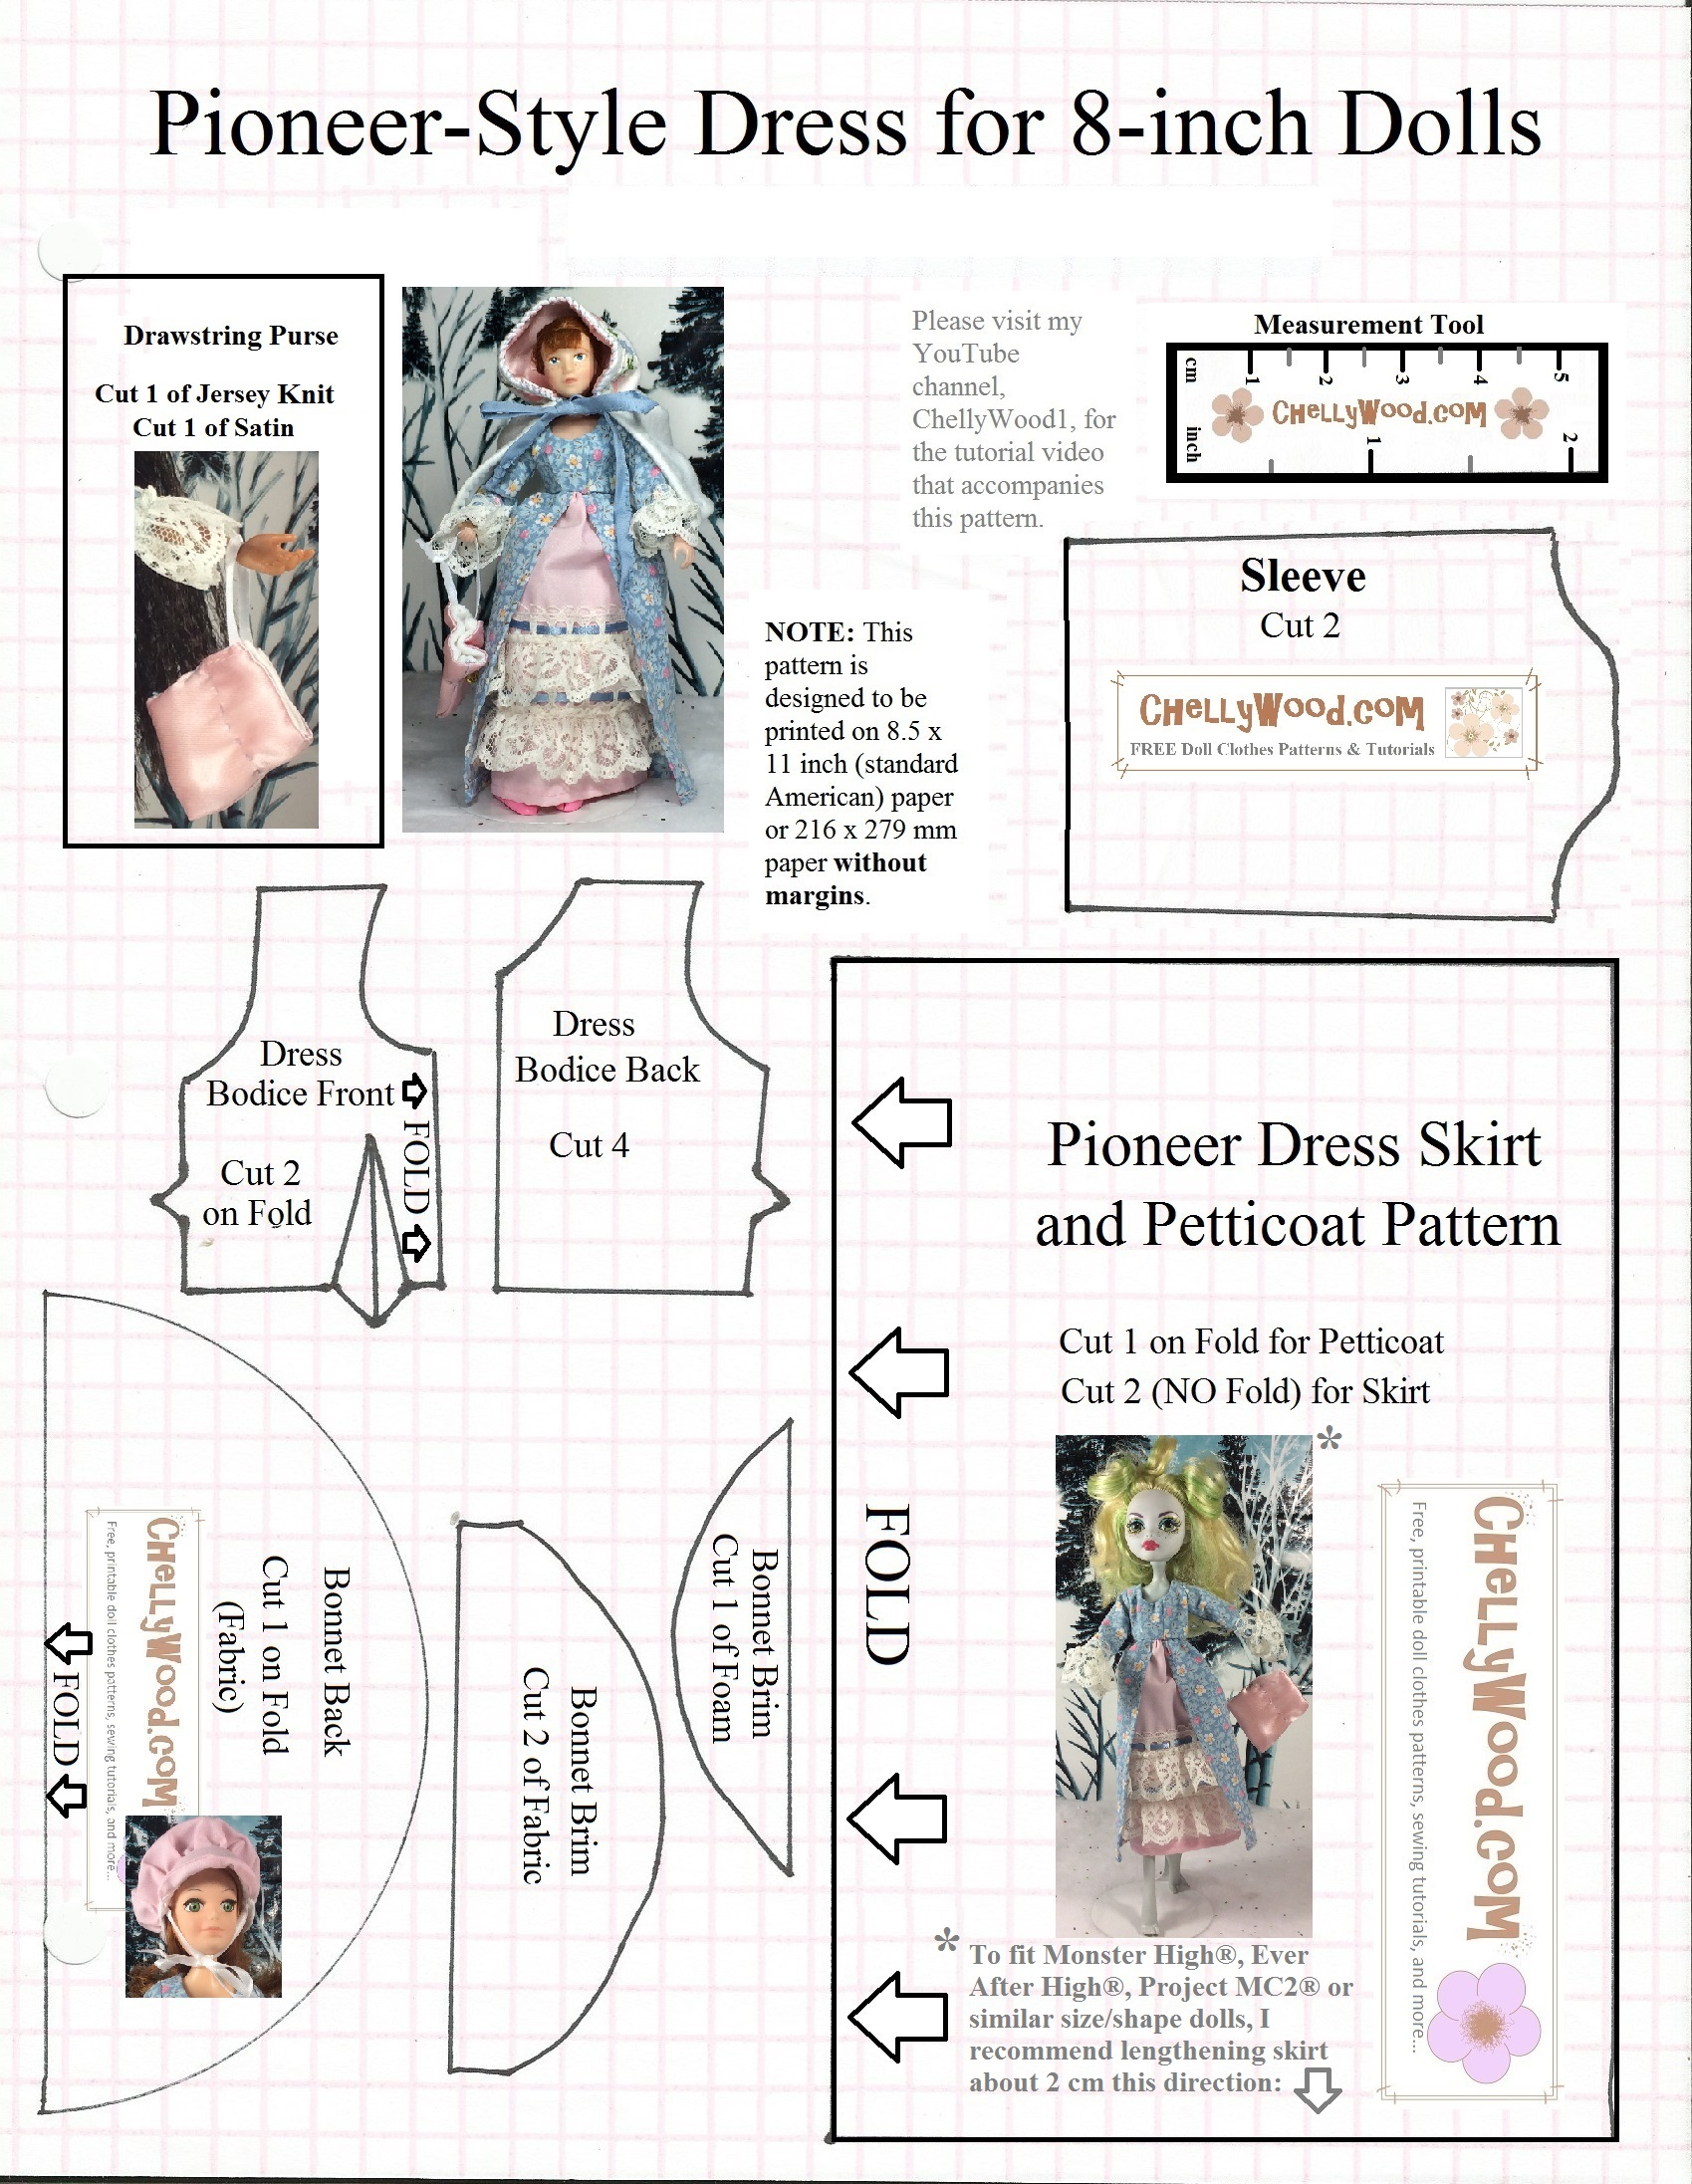 Free Knitting Patterns For 14 Inch Doll Clothes Free Sewing Patterns For Monsterhigh Everafterhigh And Many More